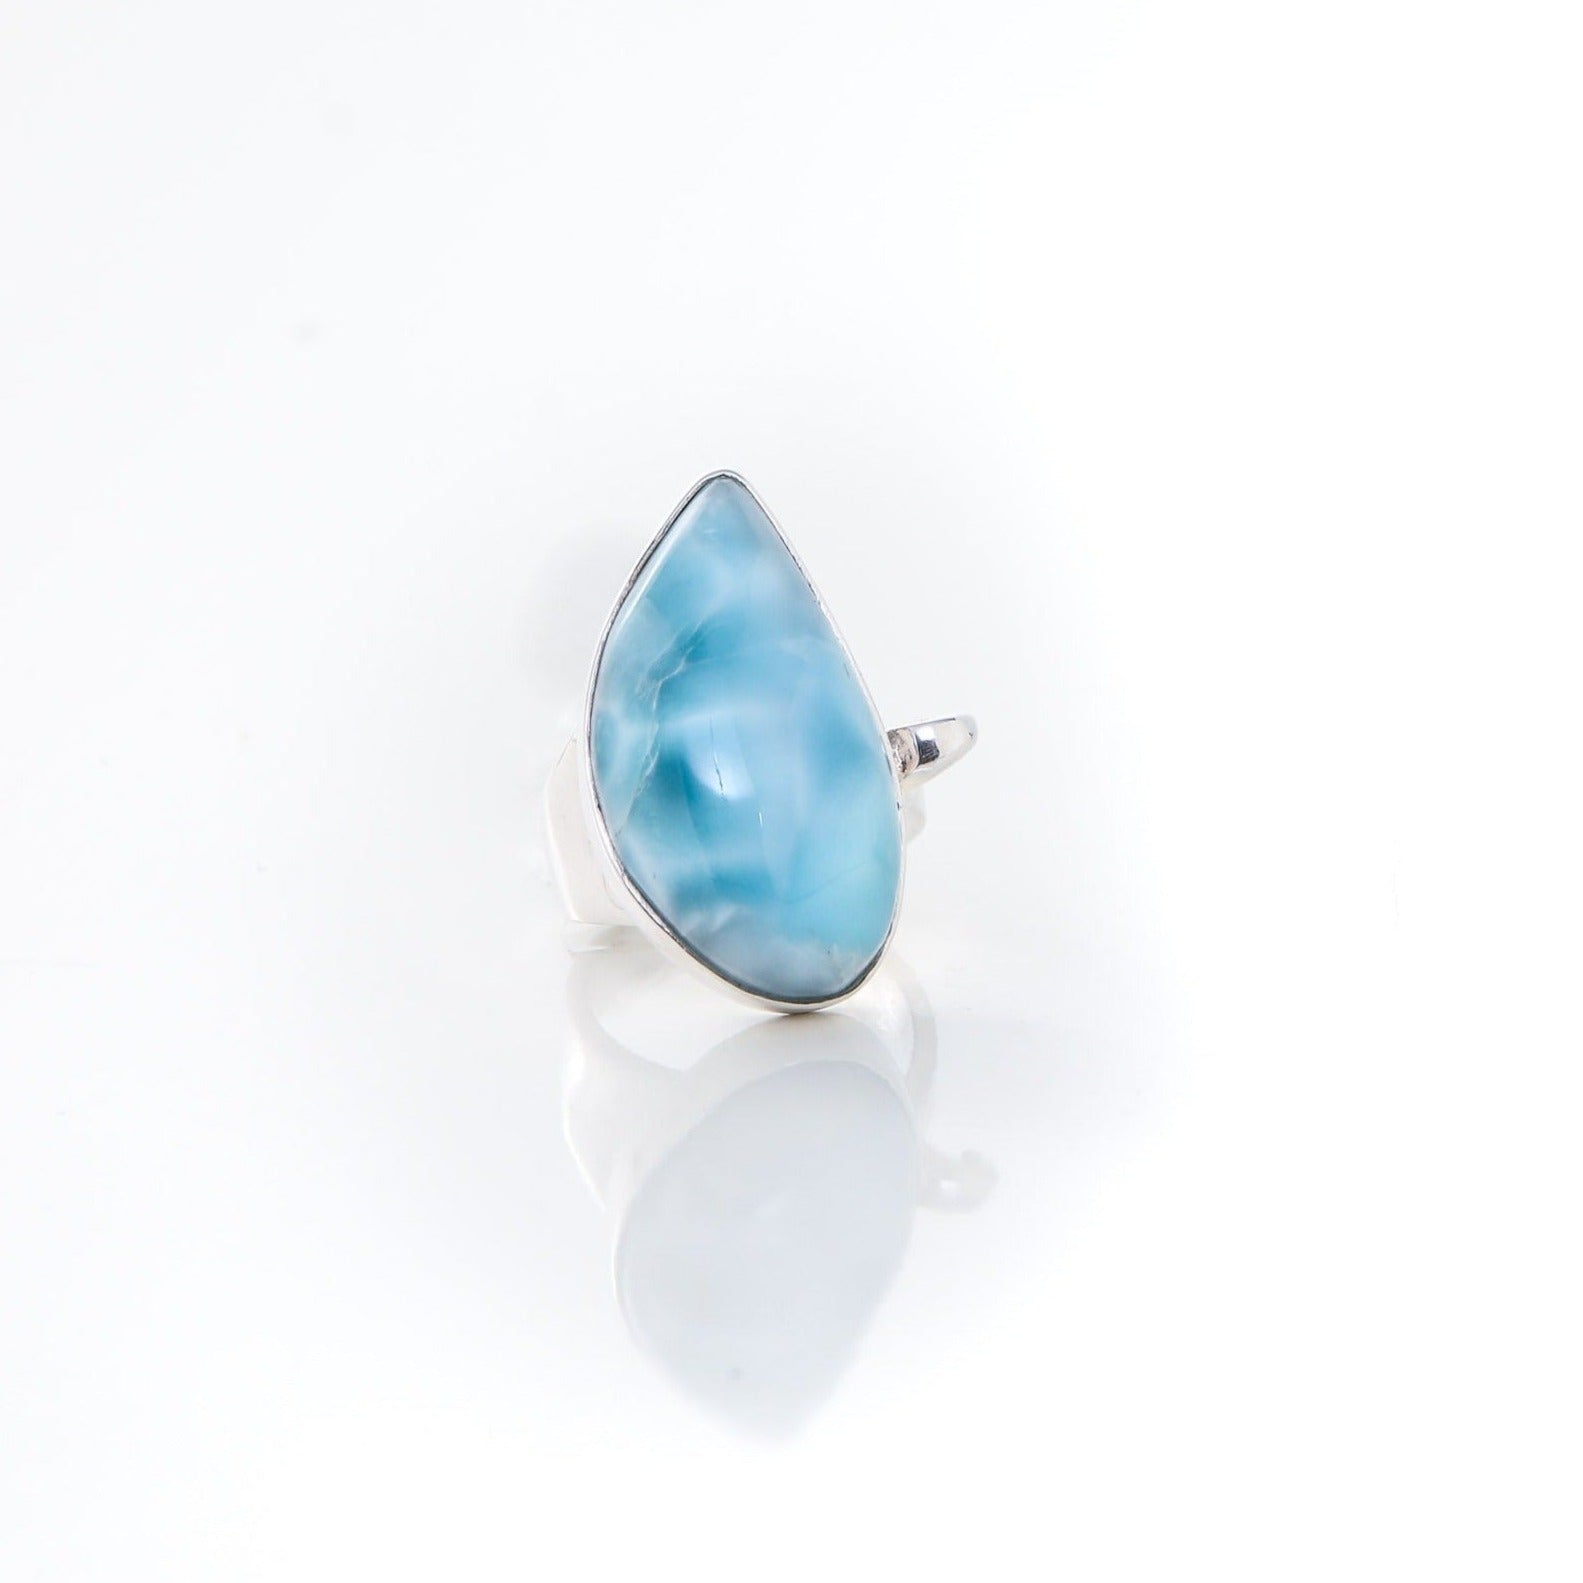 Larimar Stone and silver Ring for women